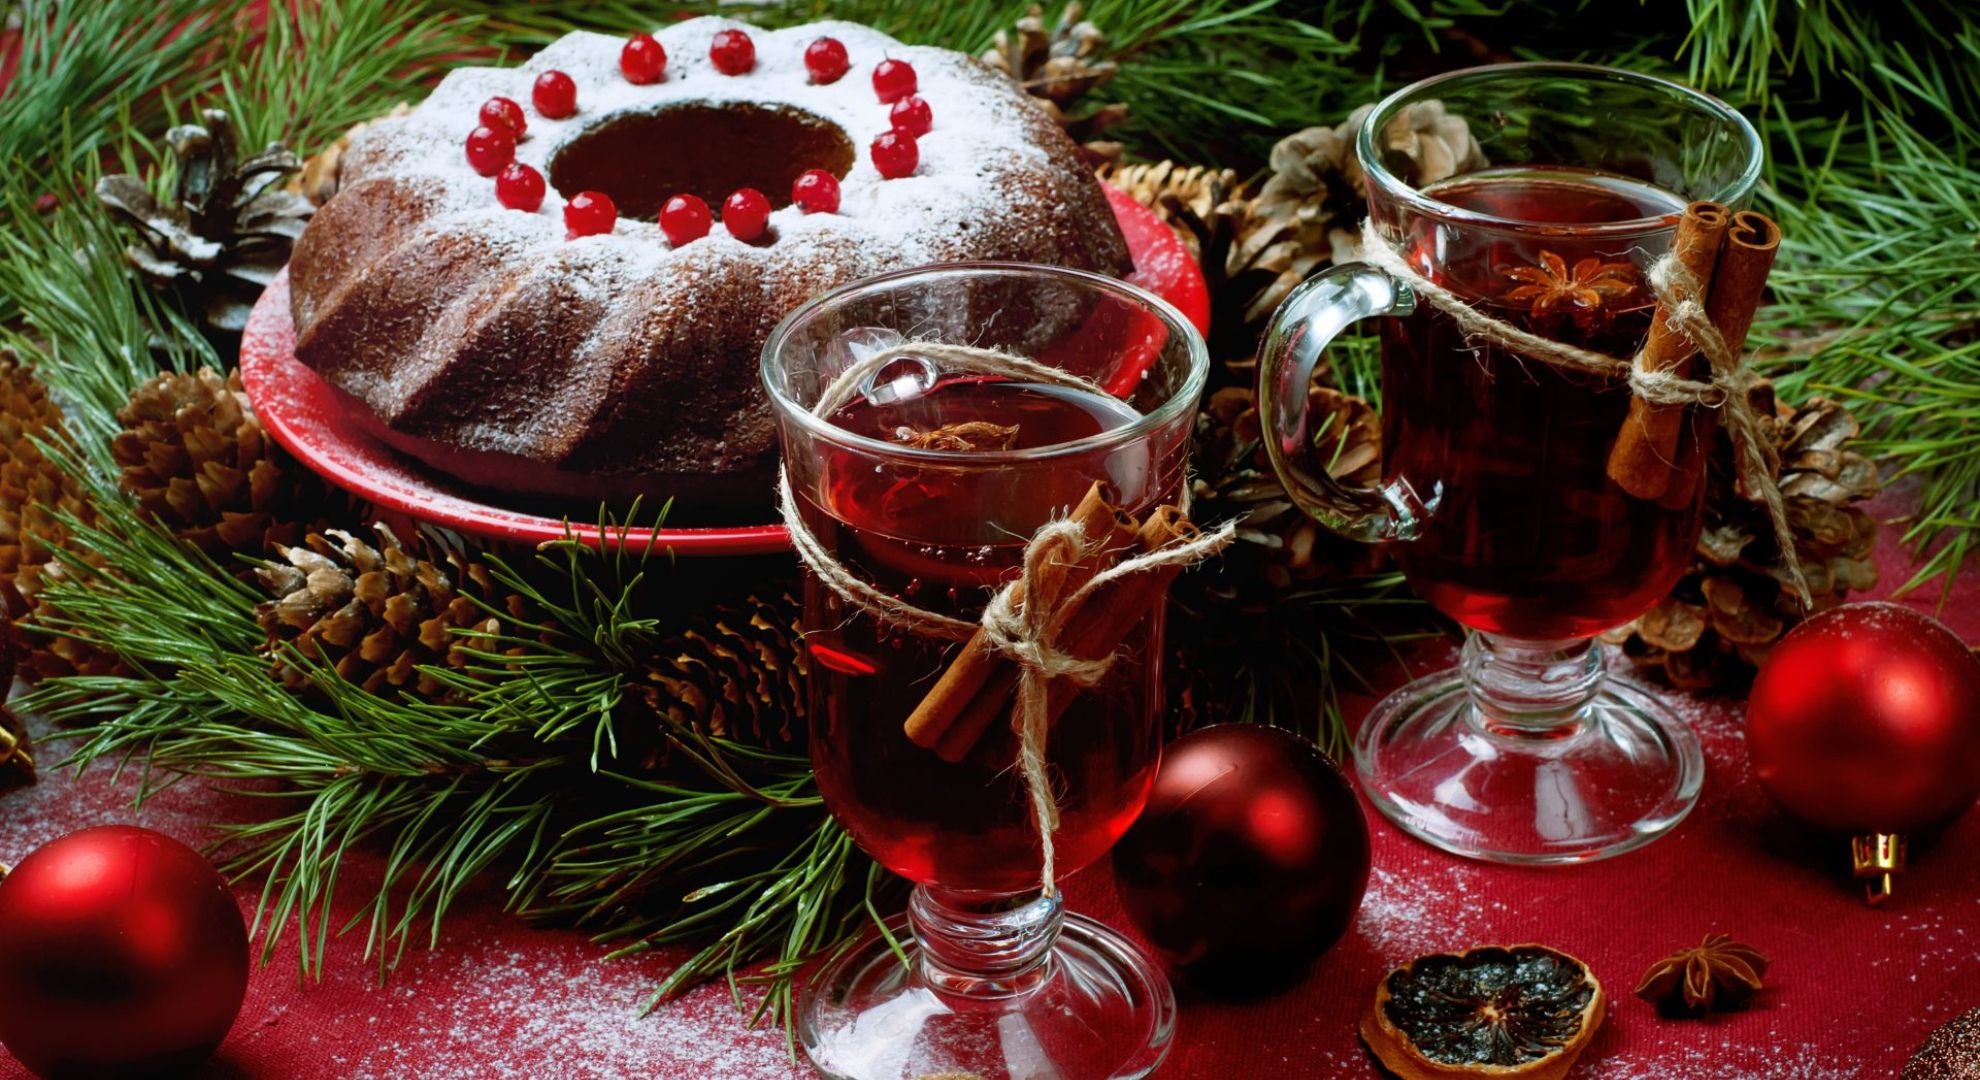 5 Easy Christmas Dessert Ideas to Pair with Your Favorite Wine